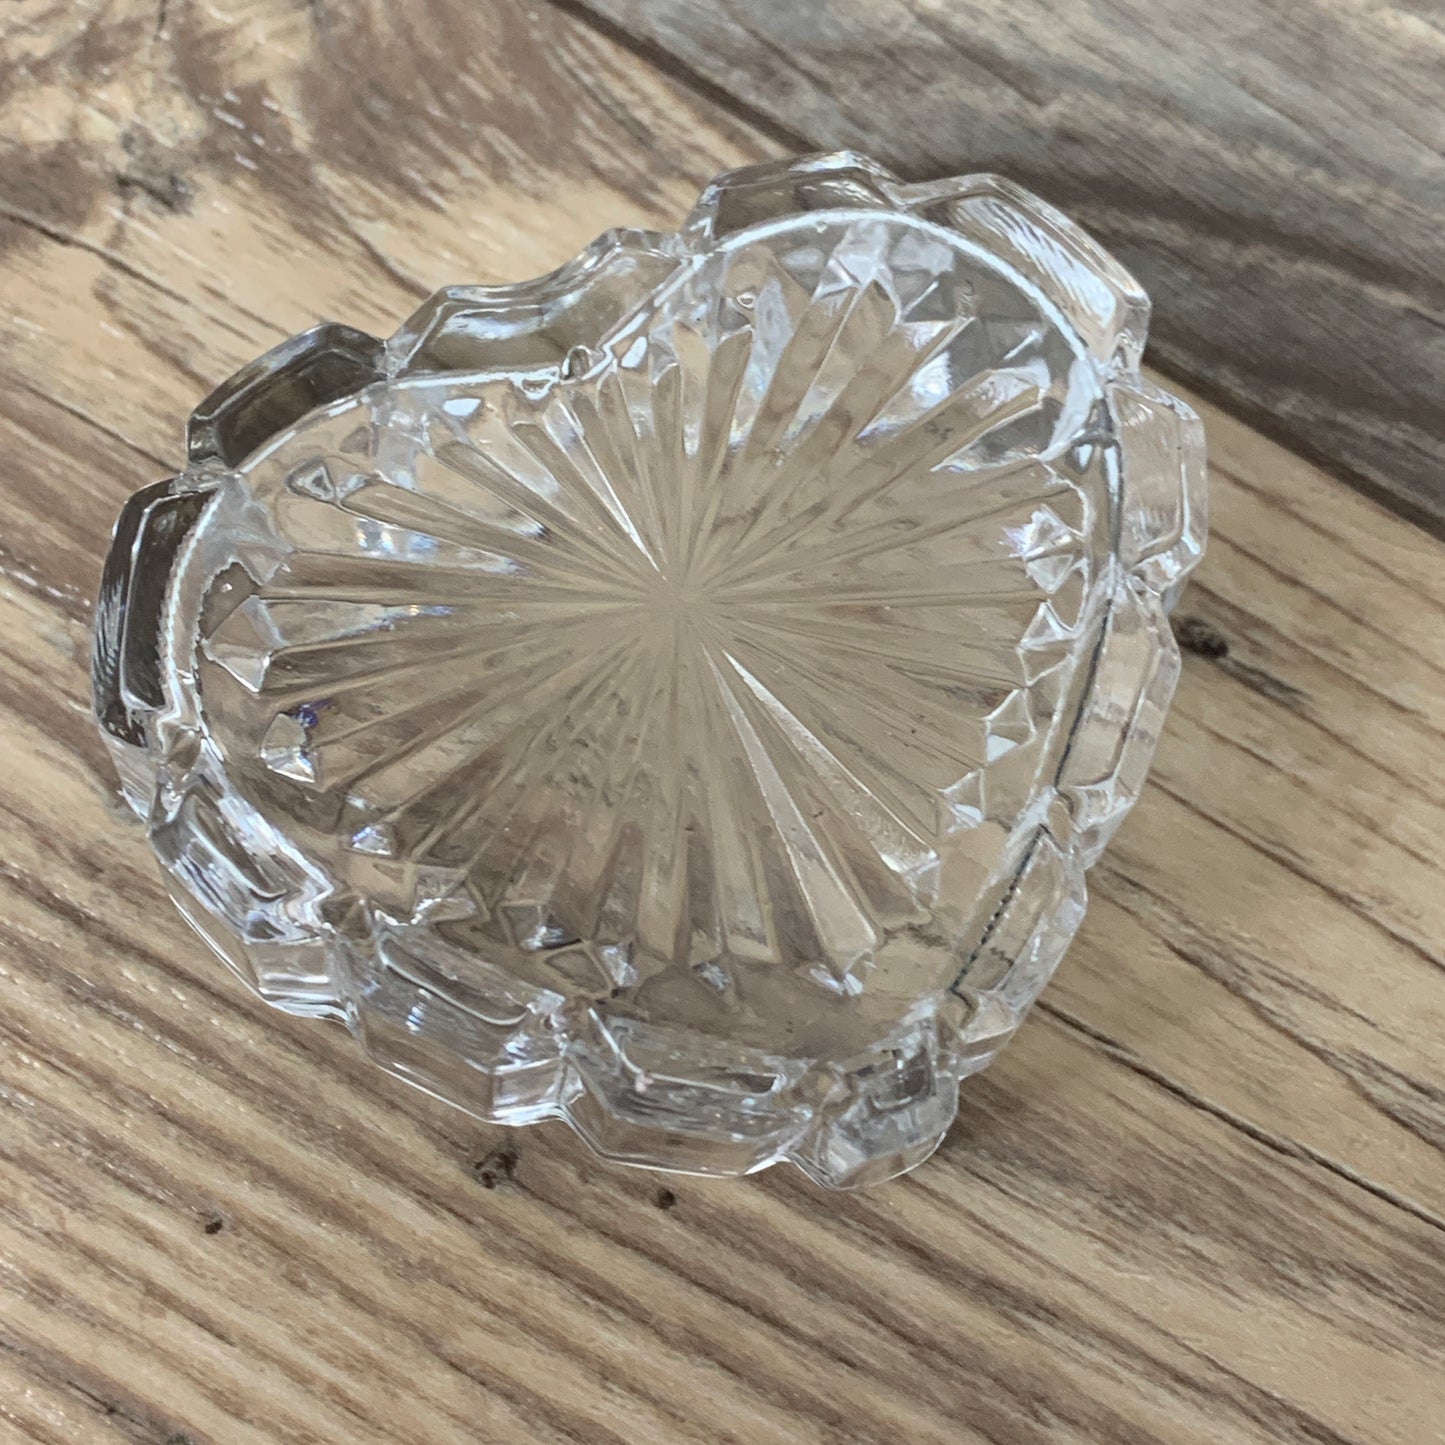 Heart Shaped Trinket Box with Silver Plated Lid